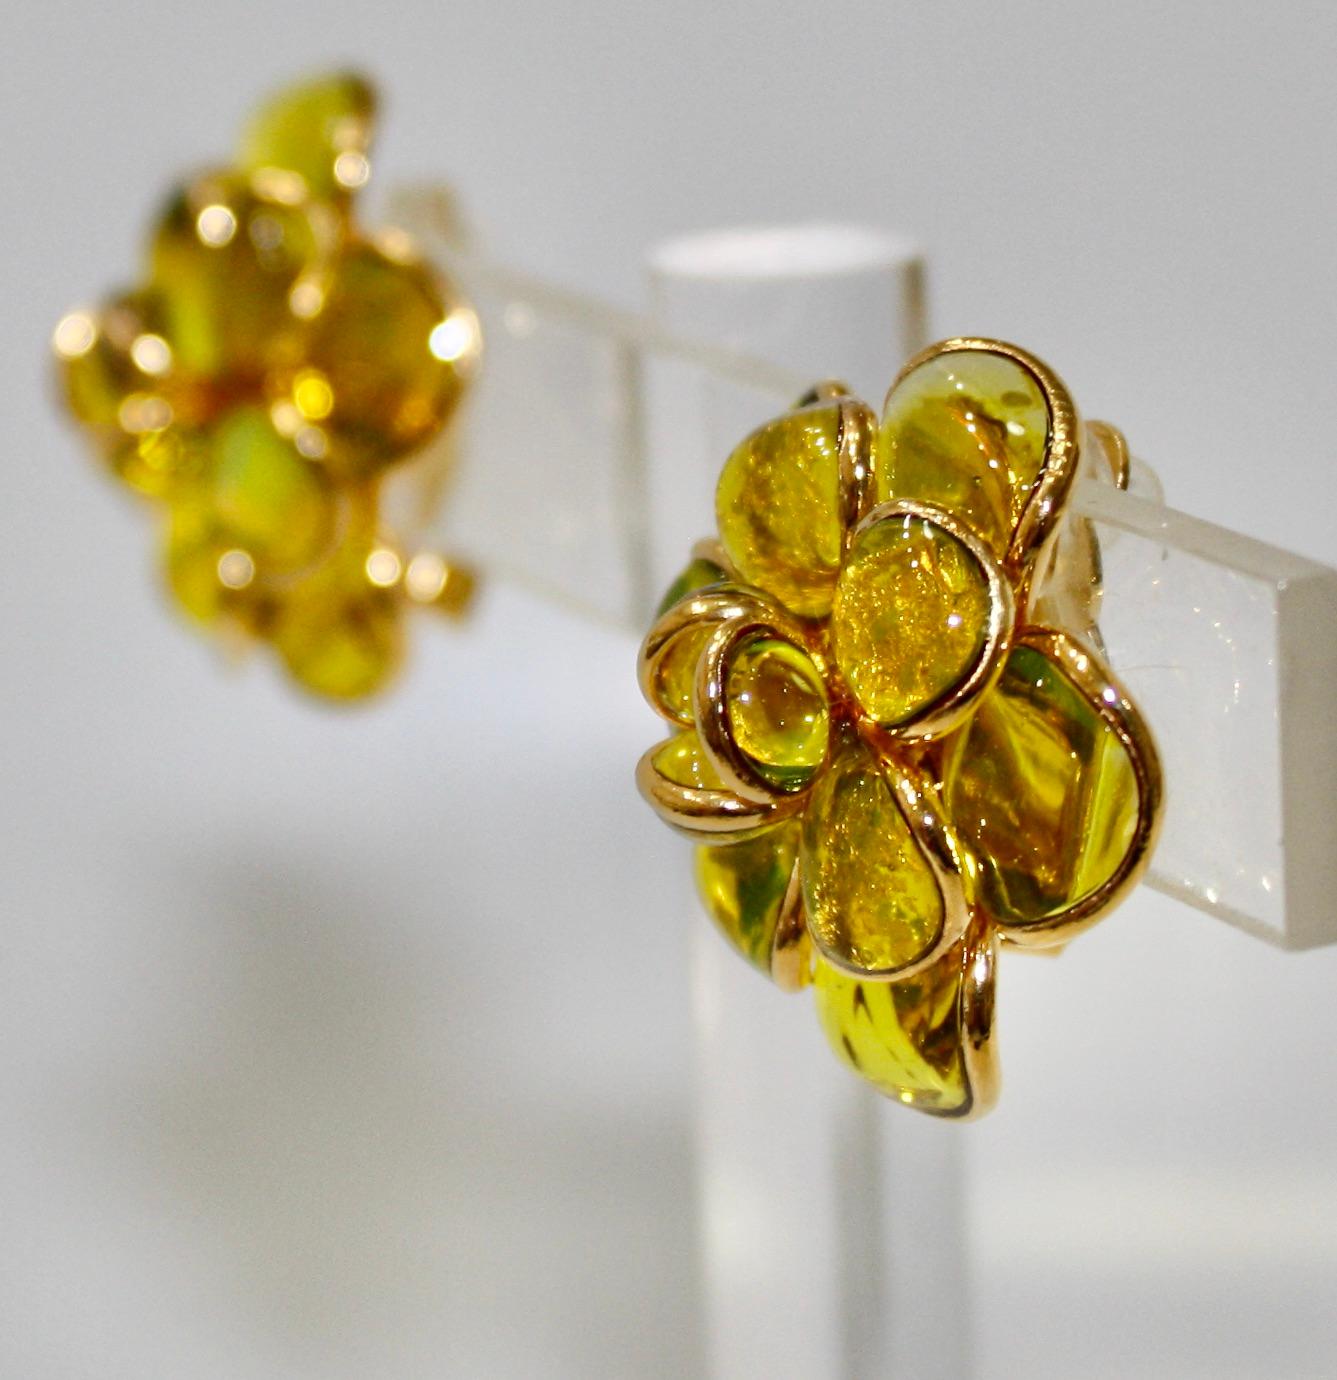 designed by the former artisans of the atelier of Gripoix, made in the special process of pate de verre or poured glass. Gold leaves are inserted in the glass. 18-carat gilded brass. Clip earrings